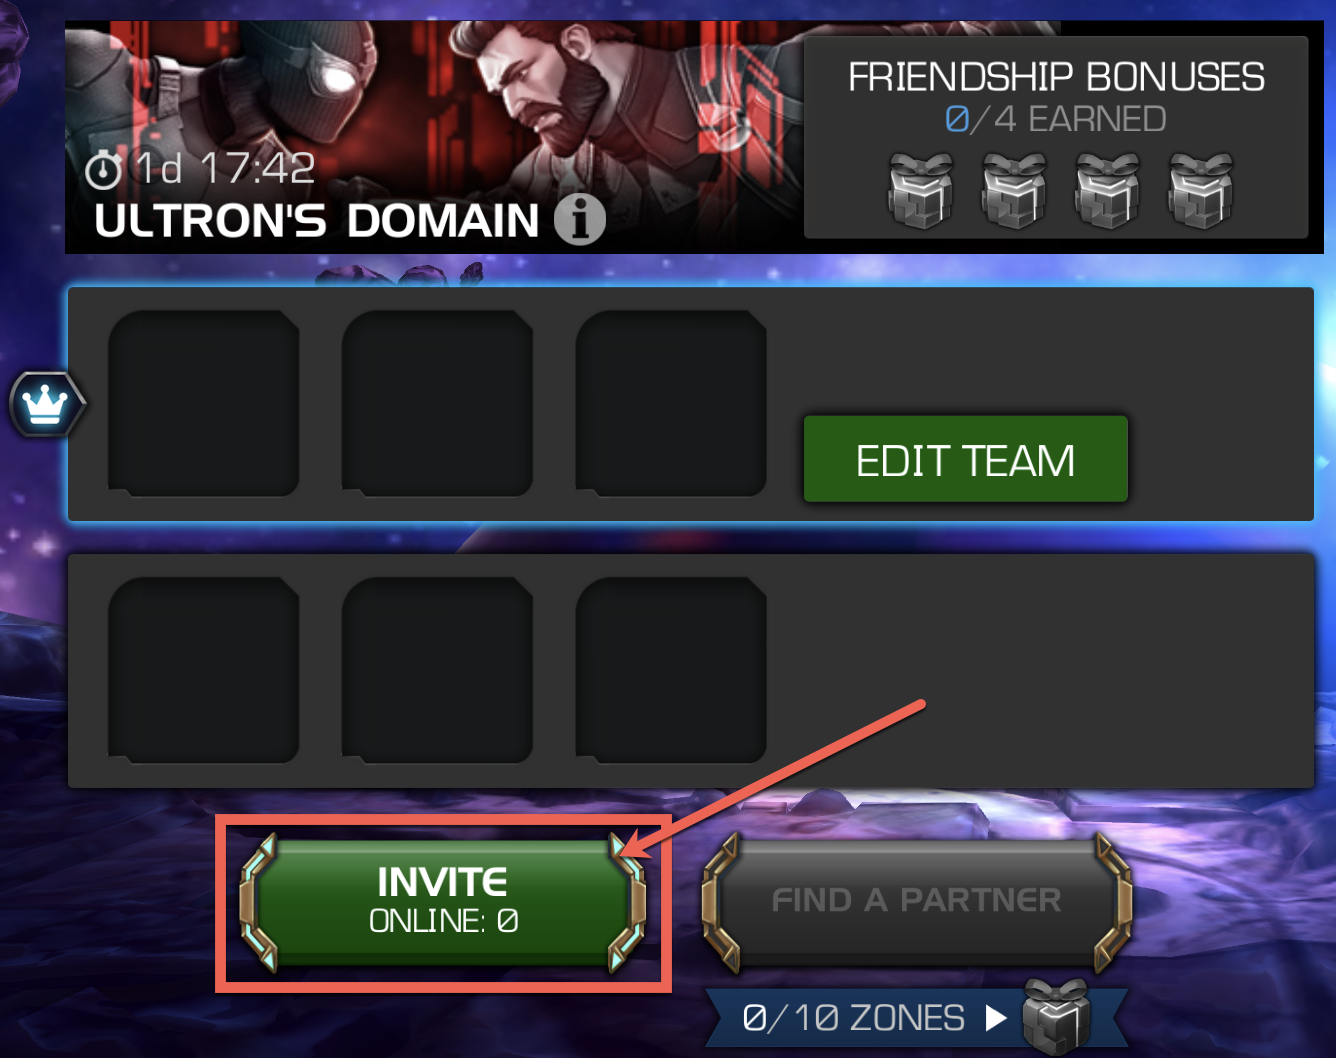 A screenshot showing the main incursions screen with the INVITE button highlighted